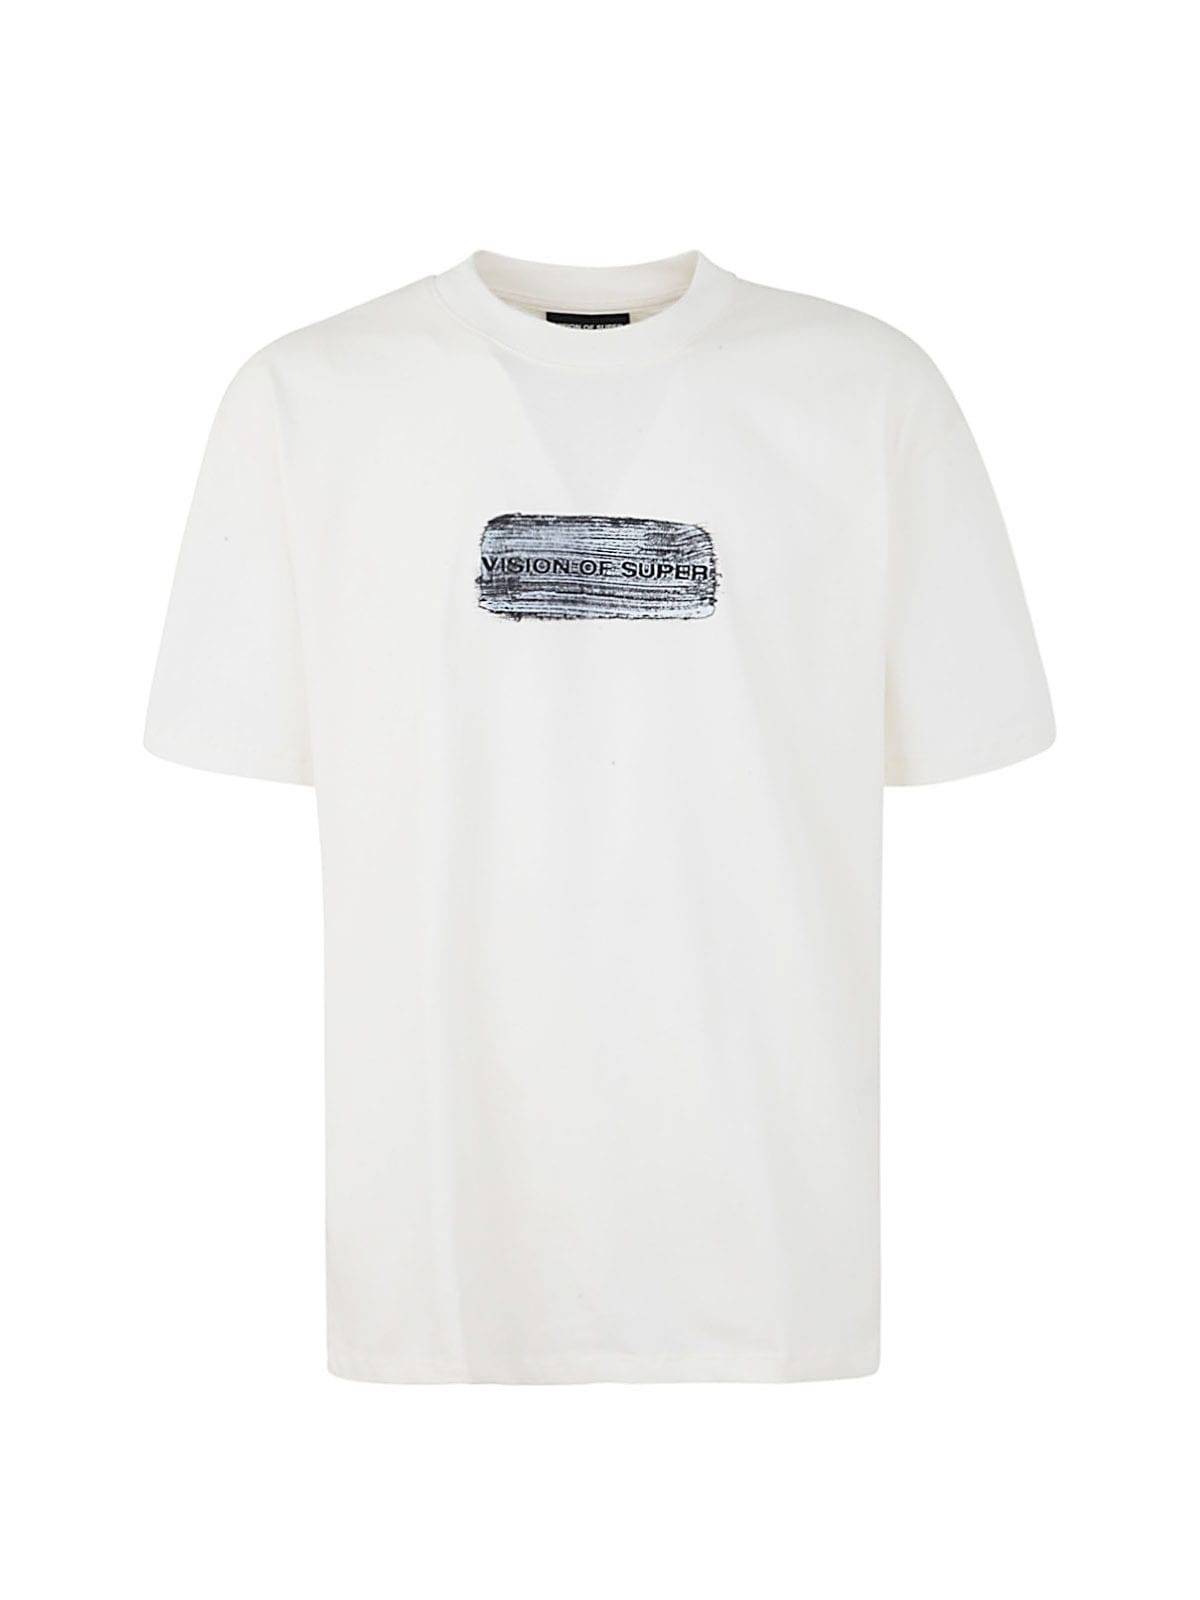 Vision of Super White T-shirt With Black White Coating